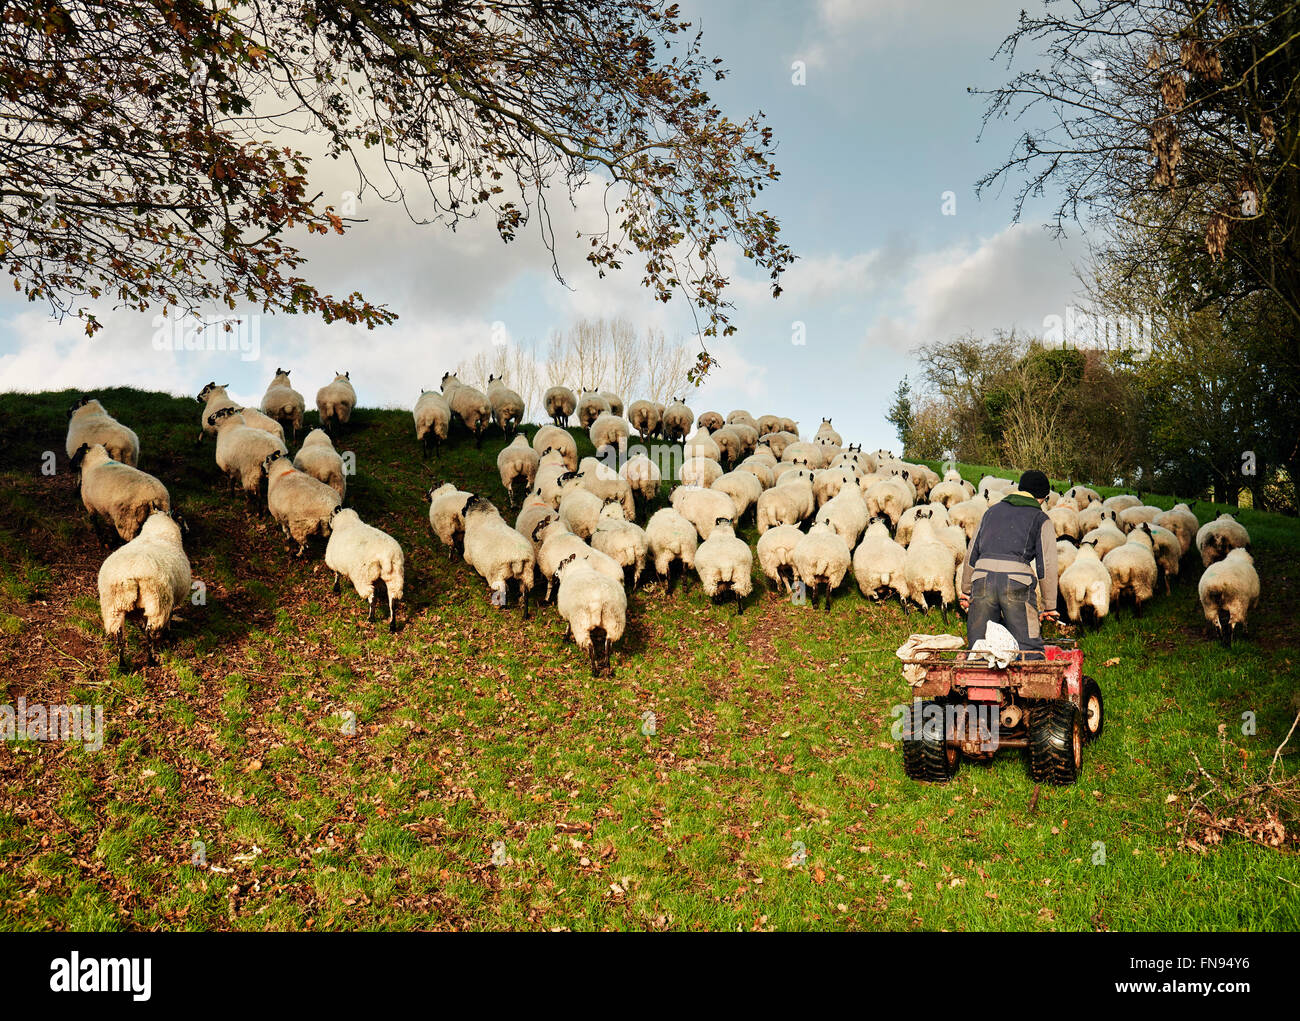 A farmer driving a quadbike herding a flock of sheep over the brow of a hill. Stock Photo